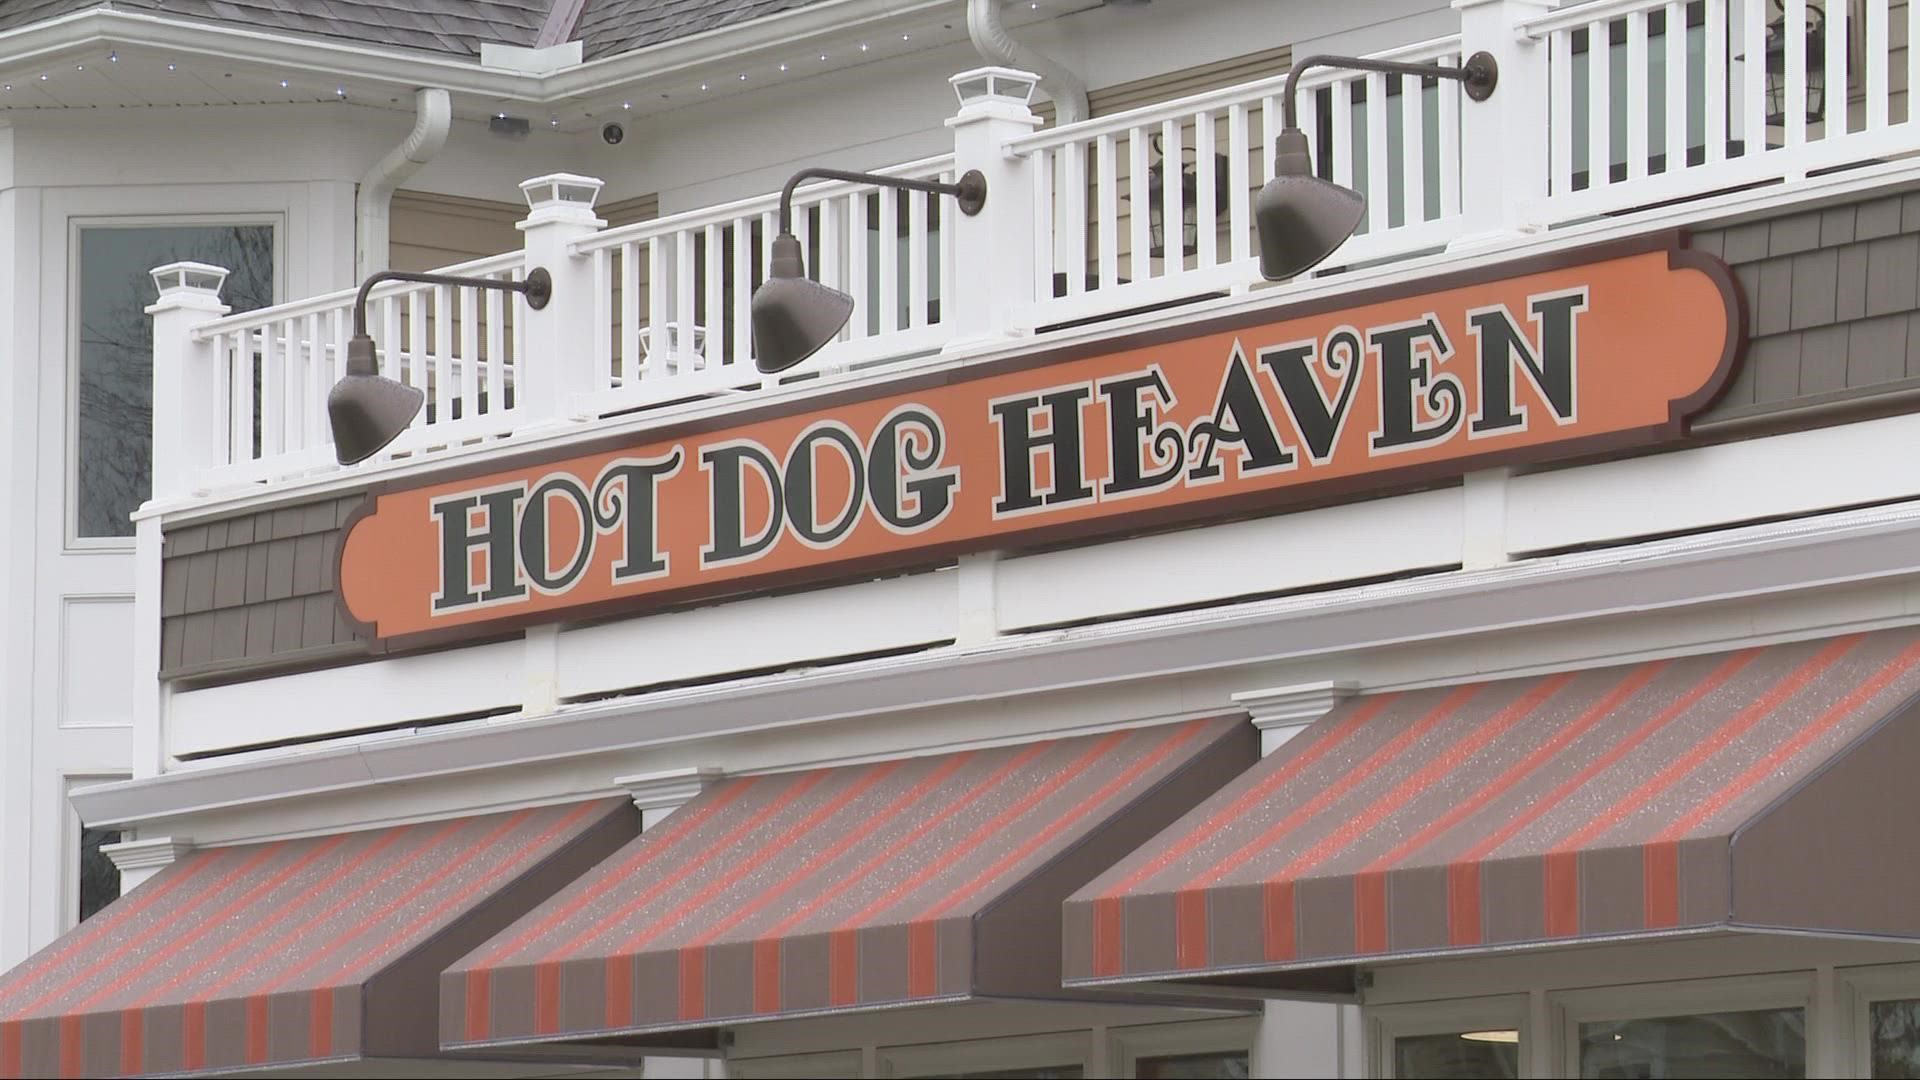 More than 19 months after it went up in flames in an overnight fire, the Hot Dog Heaven restaurant is back in Amherst.